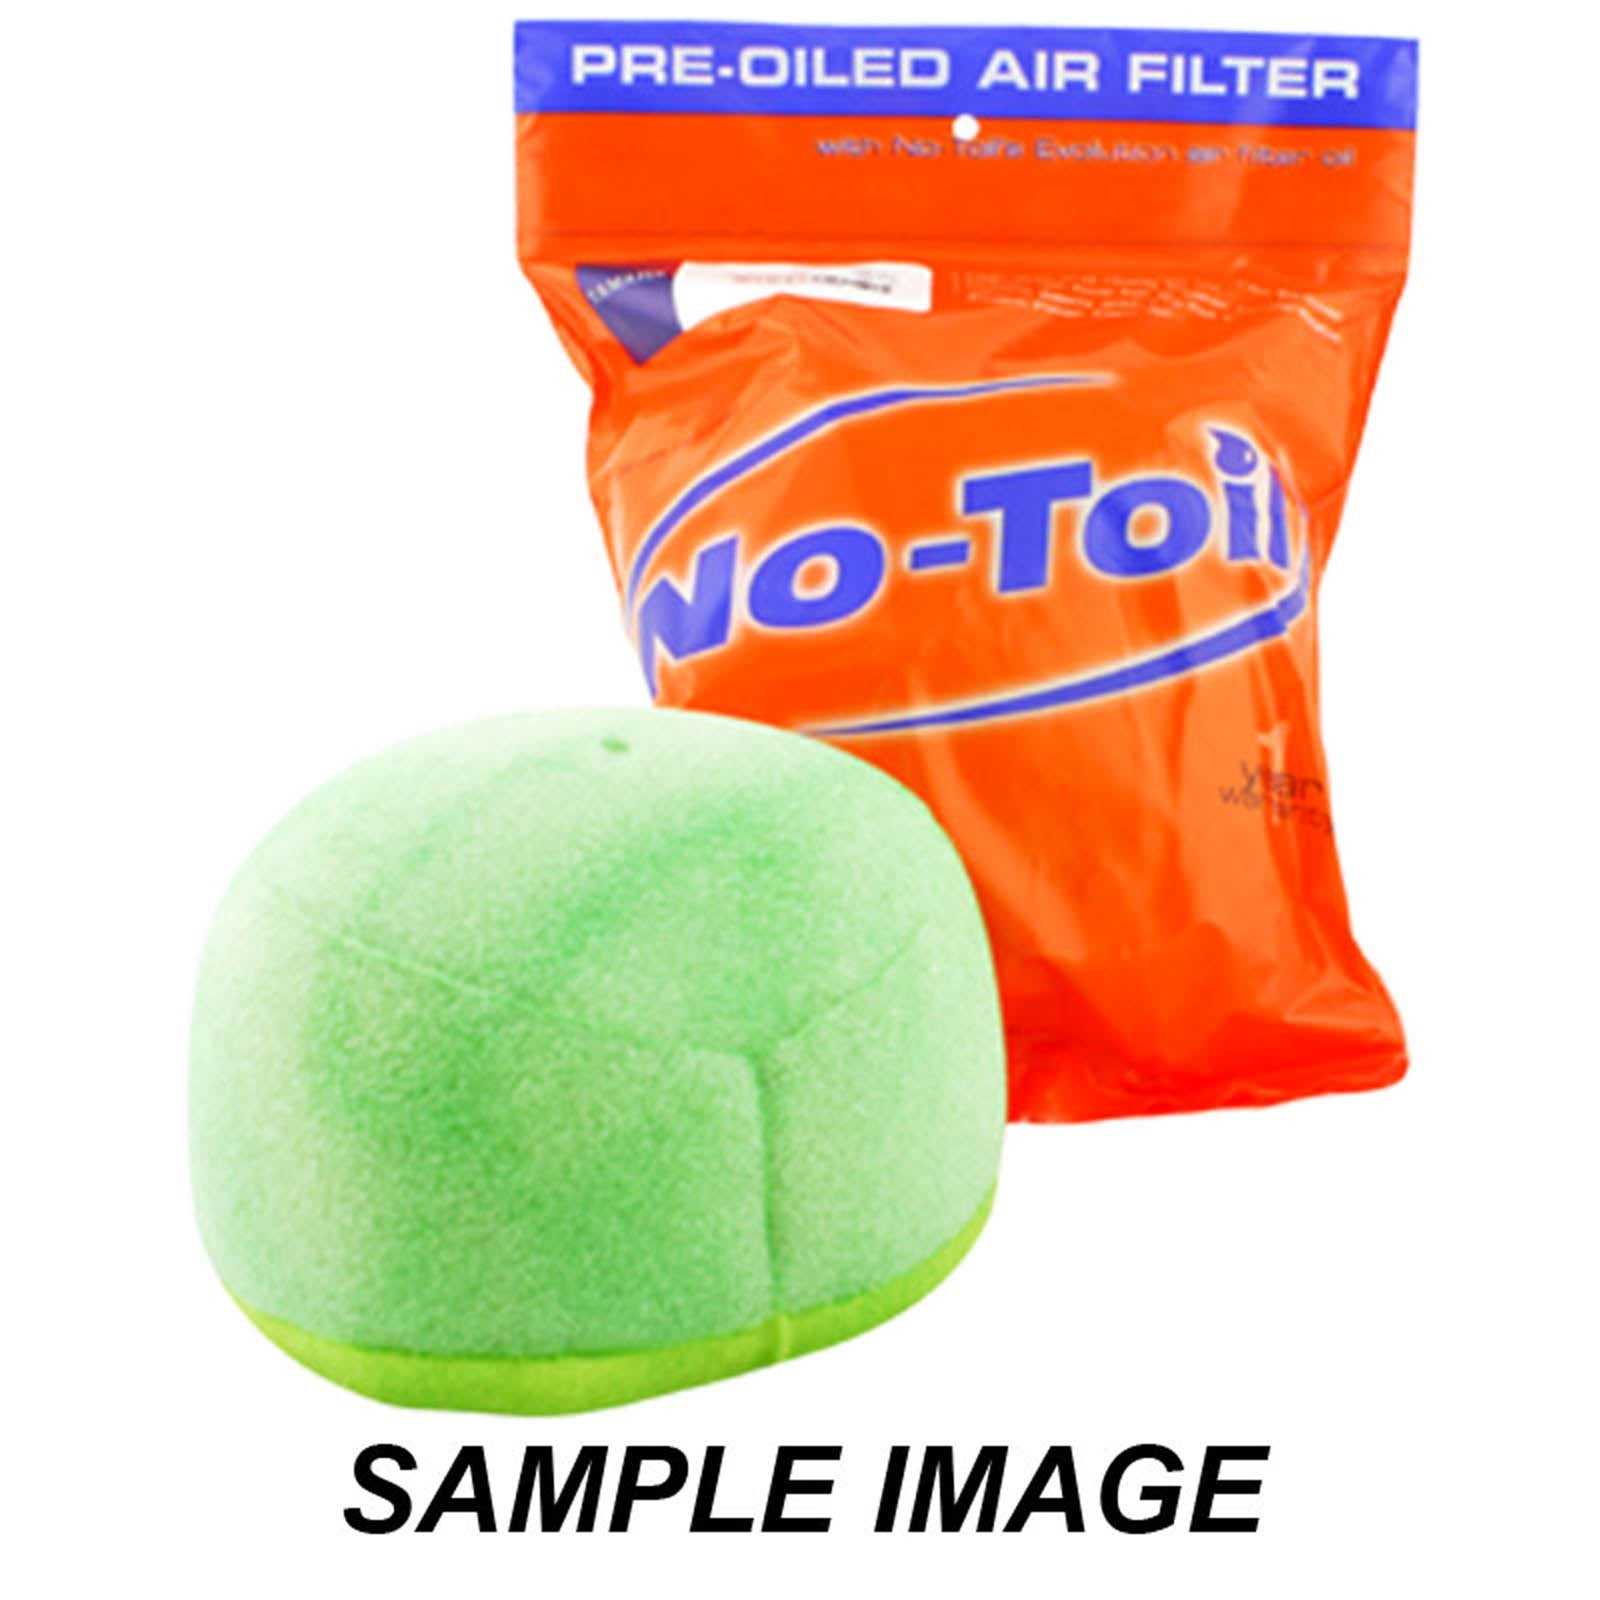 No-Toil, PRE-OILED FILTER SUZ KINGQUAD 400 11-20